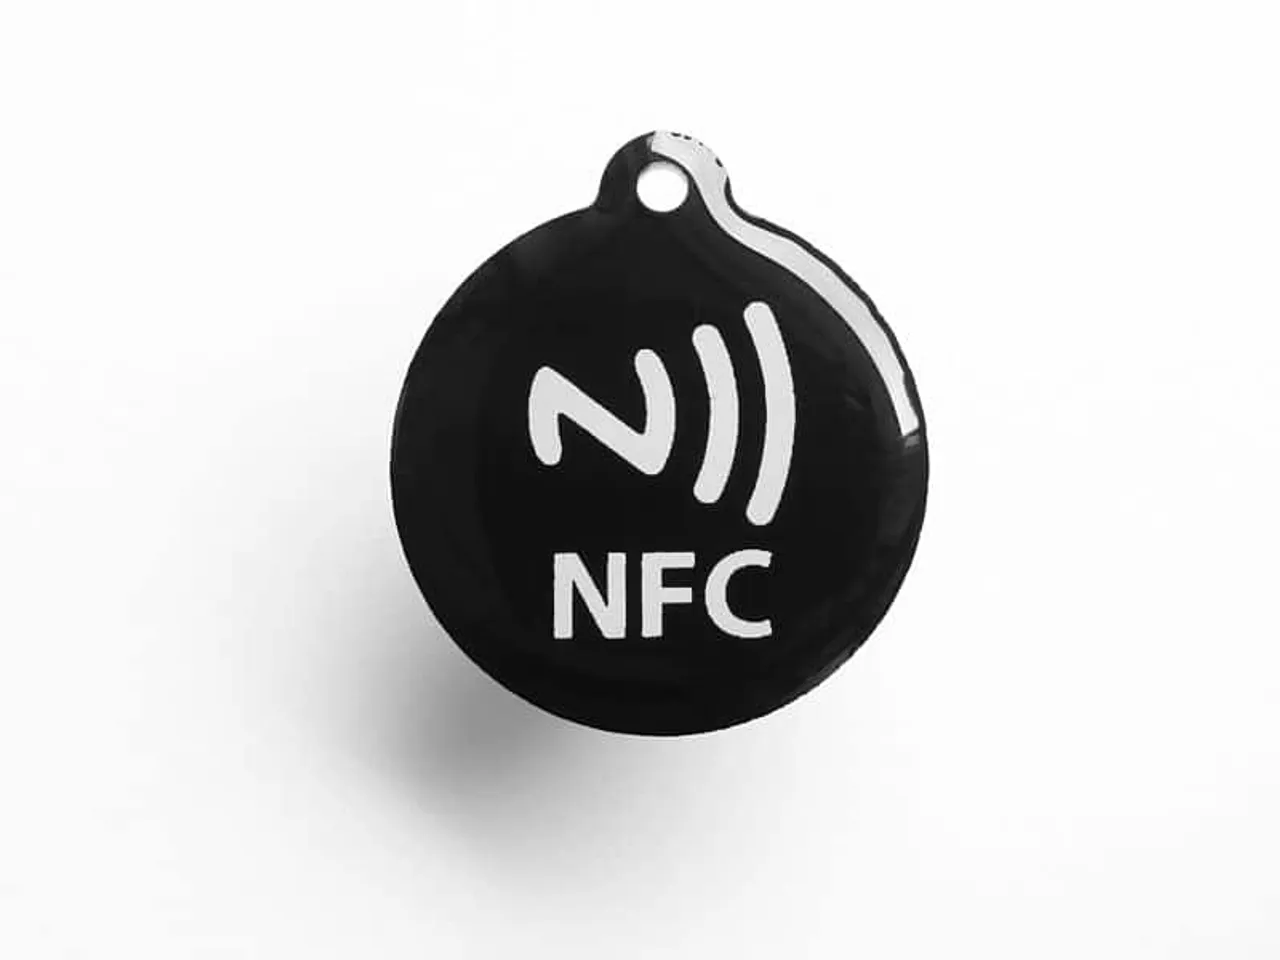 NFC will change the contours of healthcare